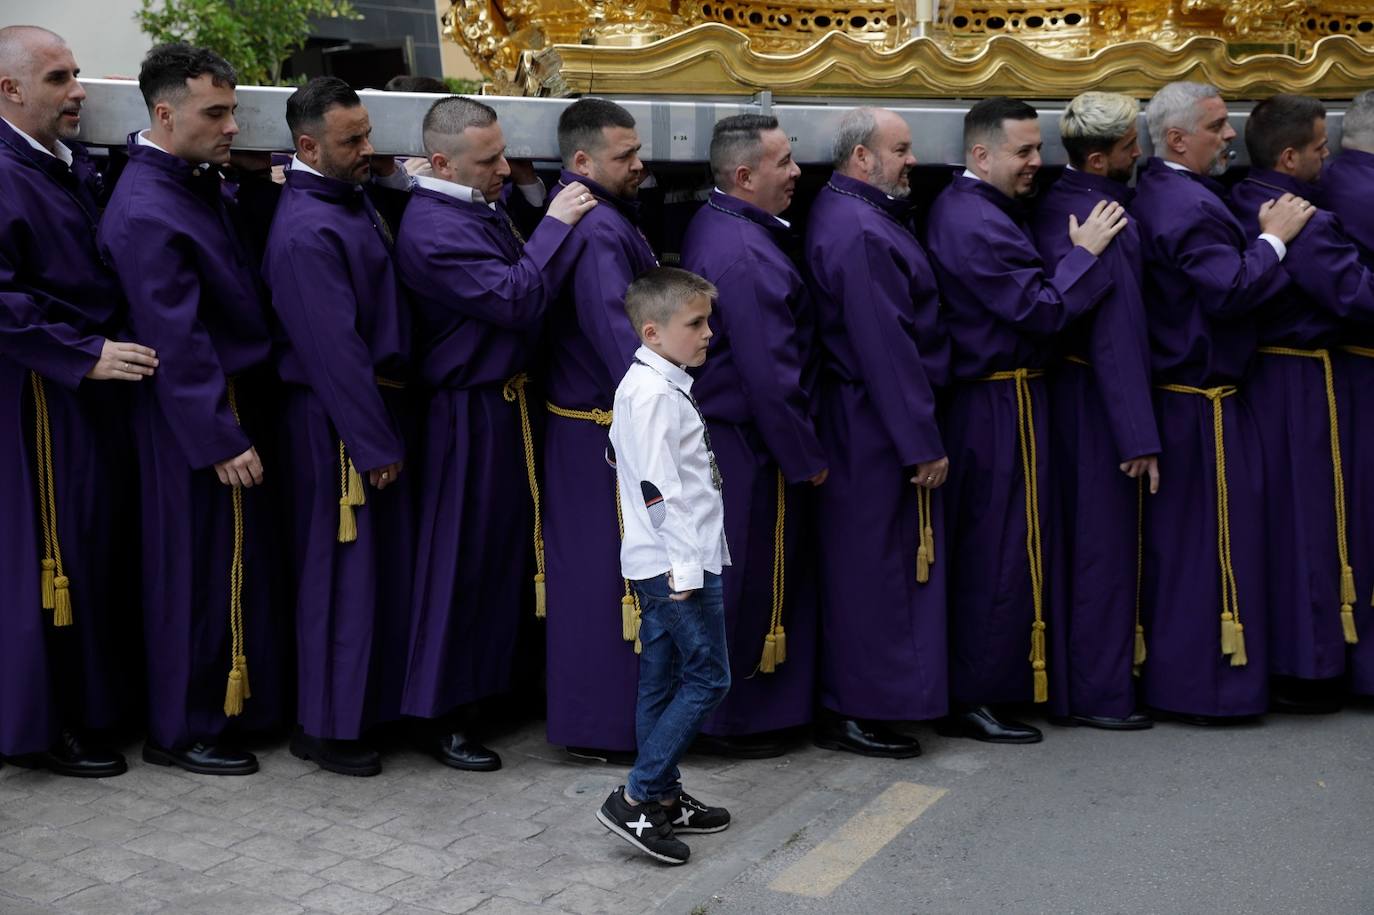 Photo special: Holy Tuesday processions in Malaga